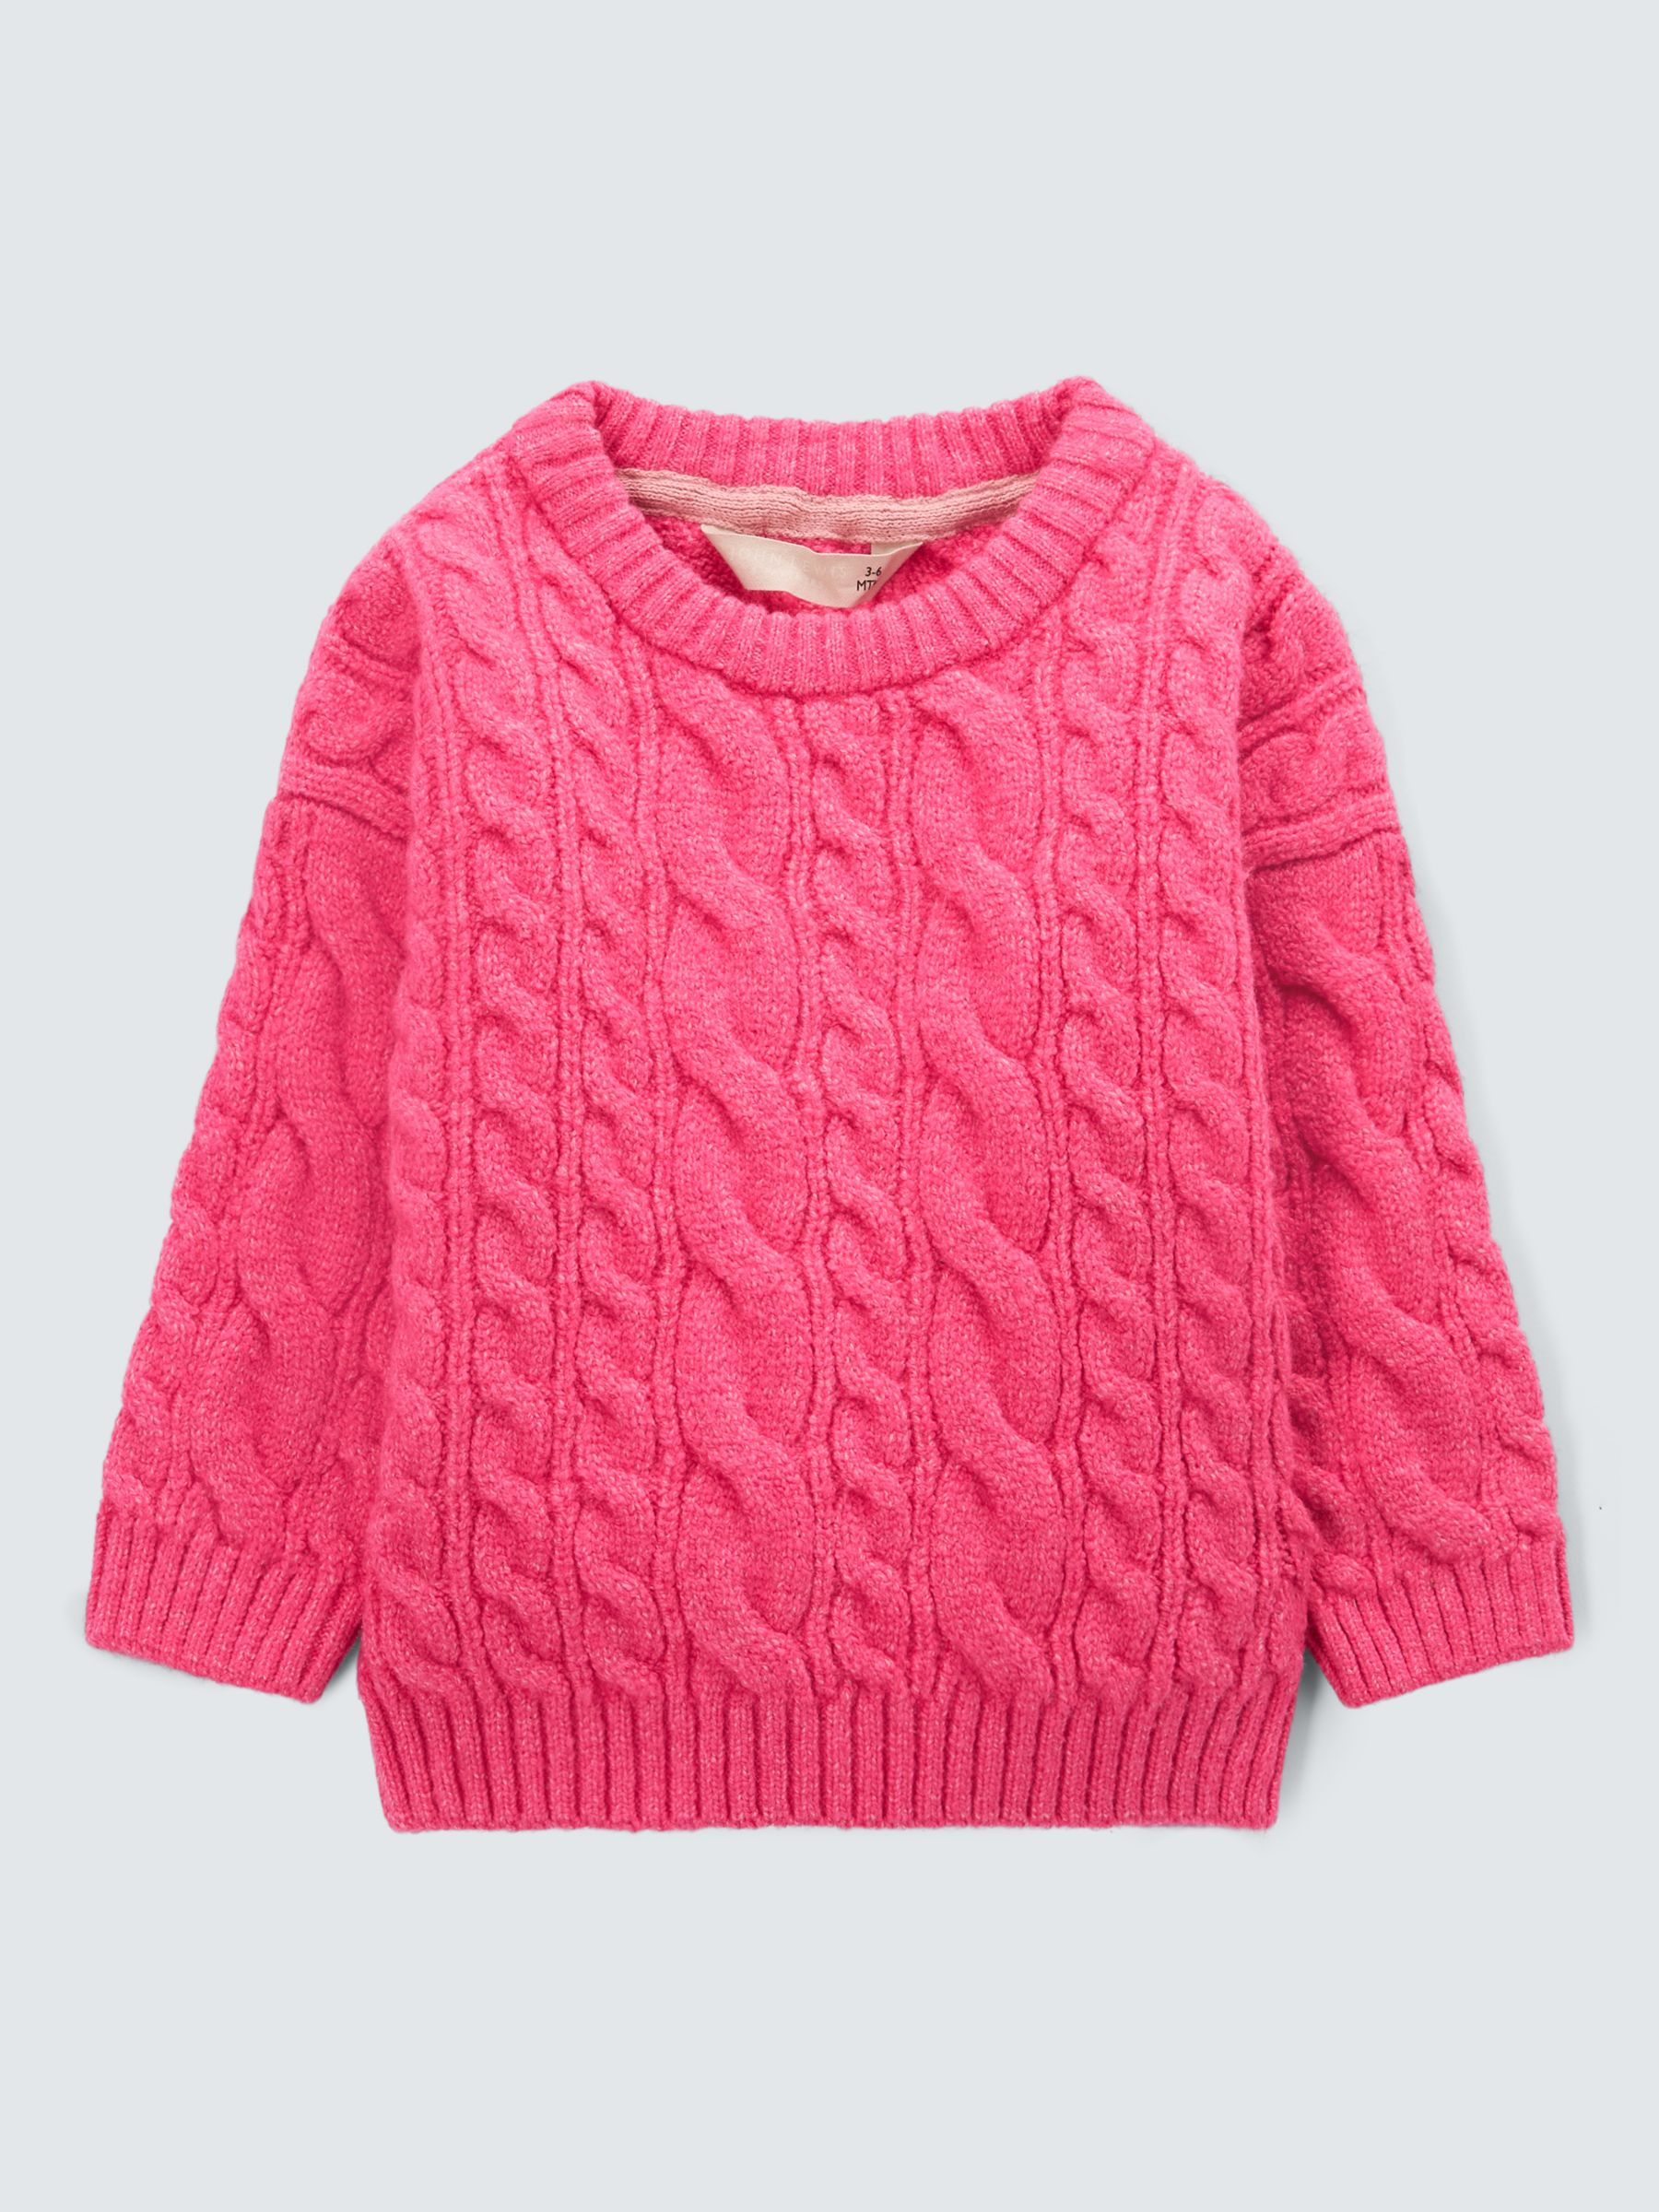 Oversized Cable Knit Sweater - Light pink - Ladies